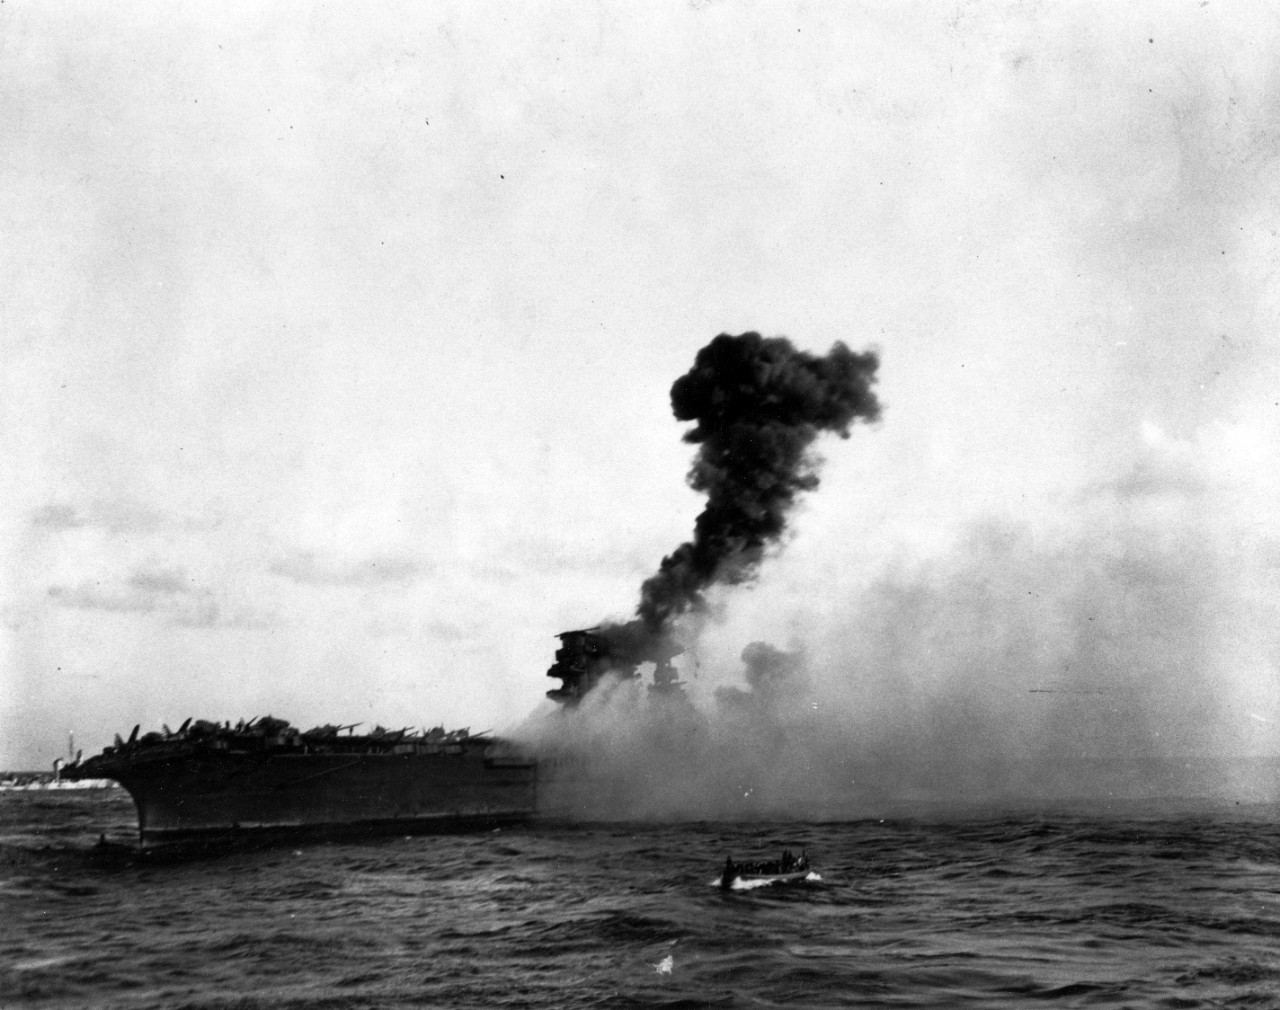 Photo #: 80-G-7406  Battle of the Coral Sea, May 1942